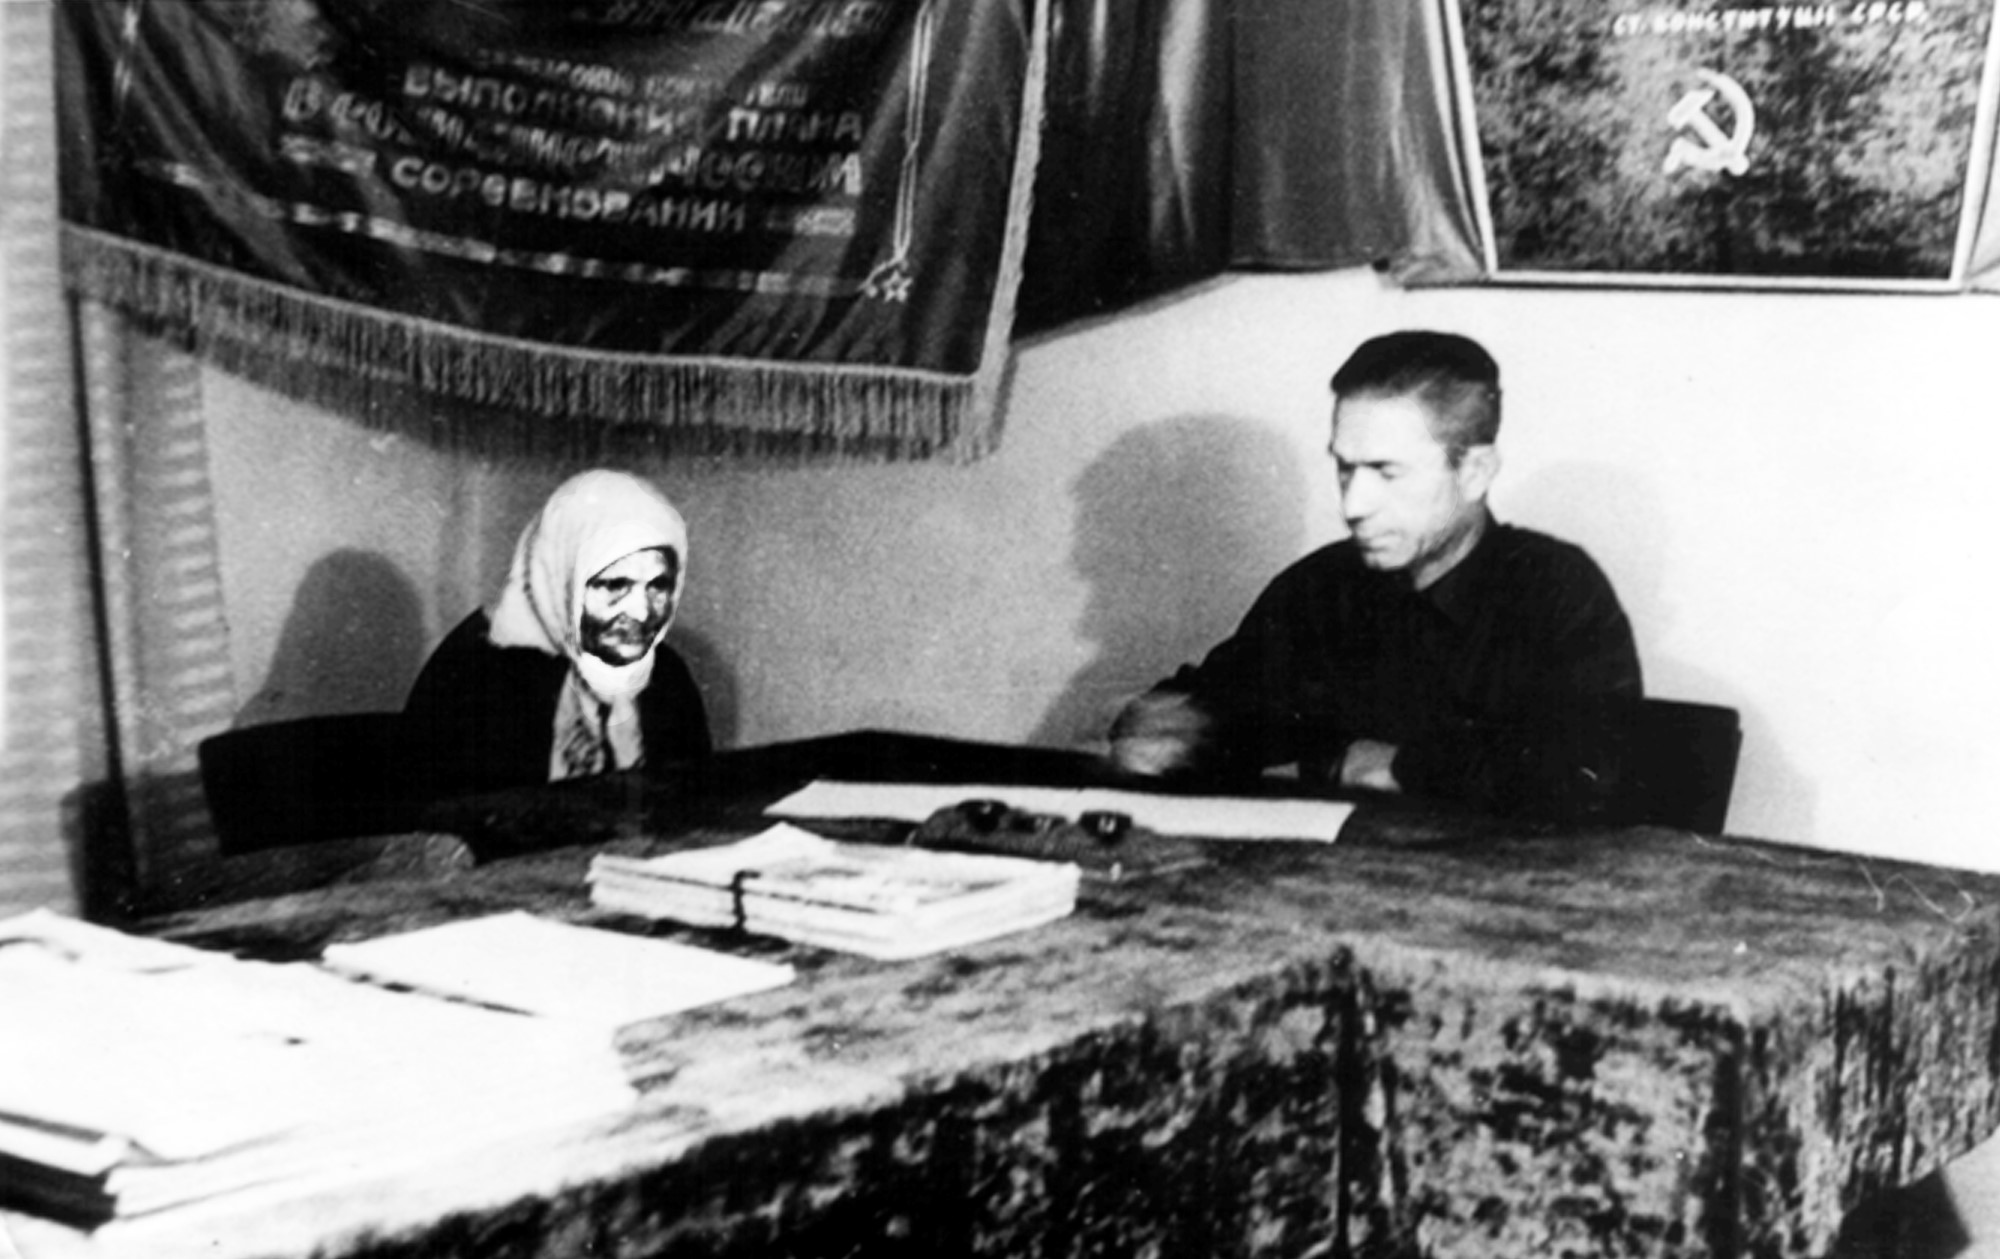 A villager signing a "grain procurement contractual agreement" for her family with the Soviet state in the village of Velyka Lepetykha. Such forced "contracts" served as justification to strip Ukrainian farmers of literally all the food they produced, leaving their families to starve. Source: Olena Tsipko Local History Museum of Velyka Lepetykha